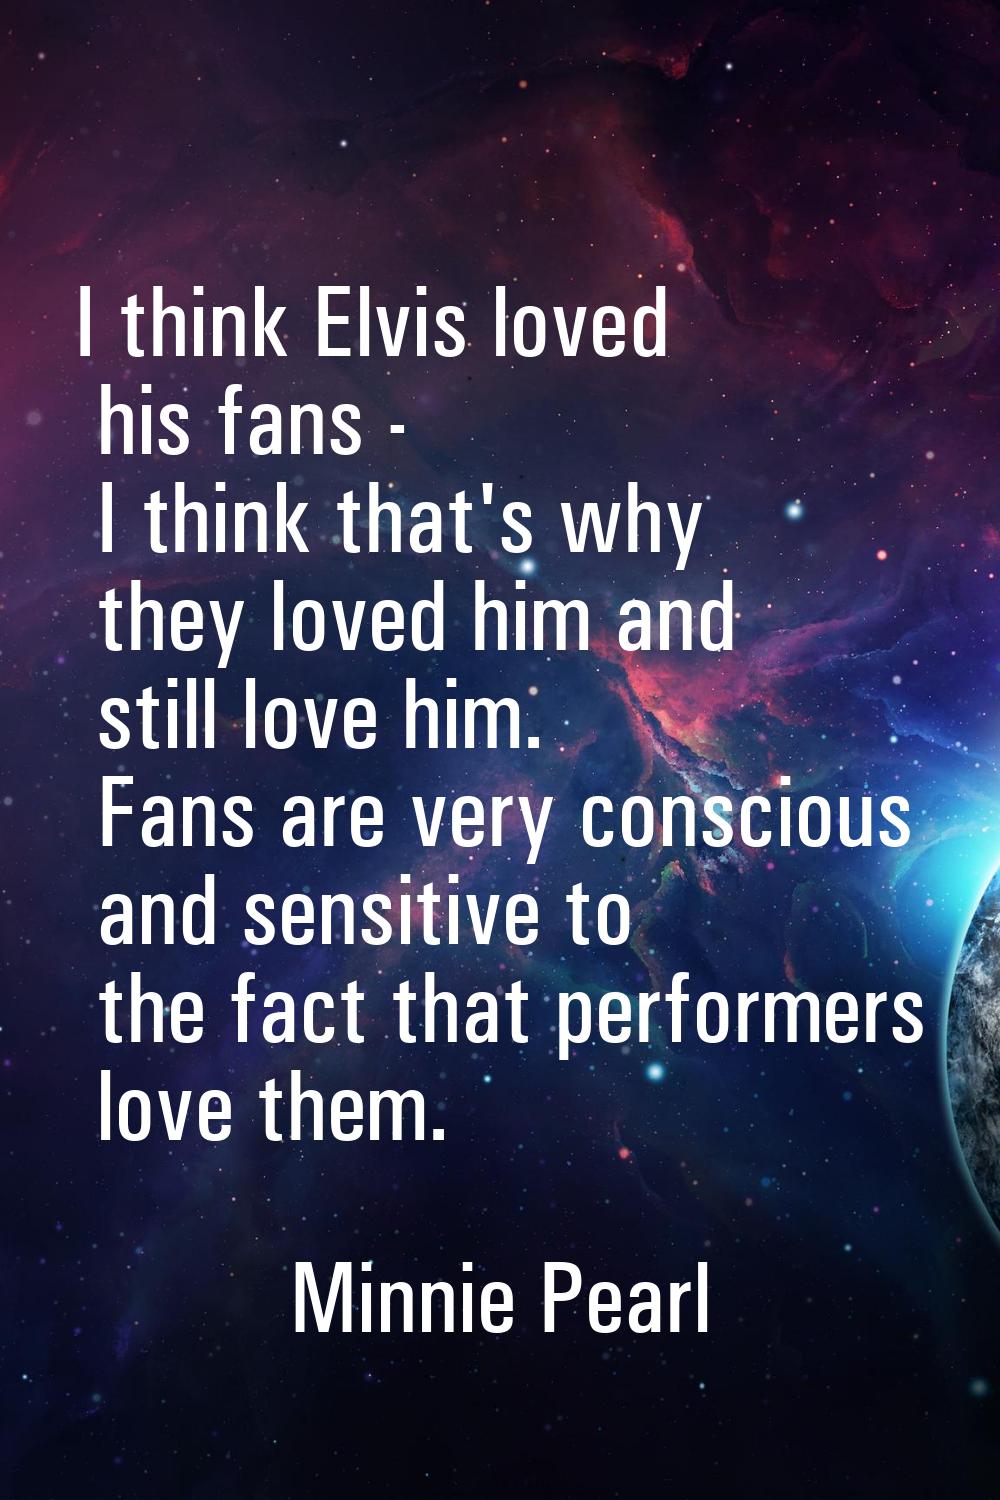 I think Elvis loved his fans - I think that's why they loved him and still love him. Fans are very 